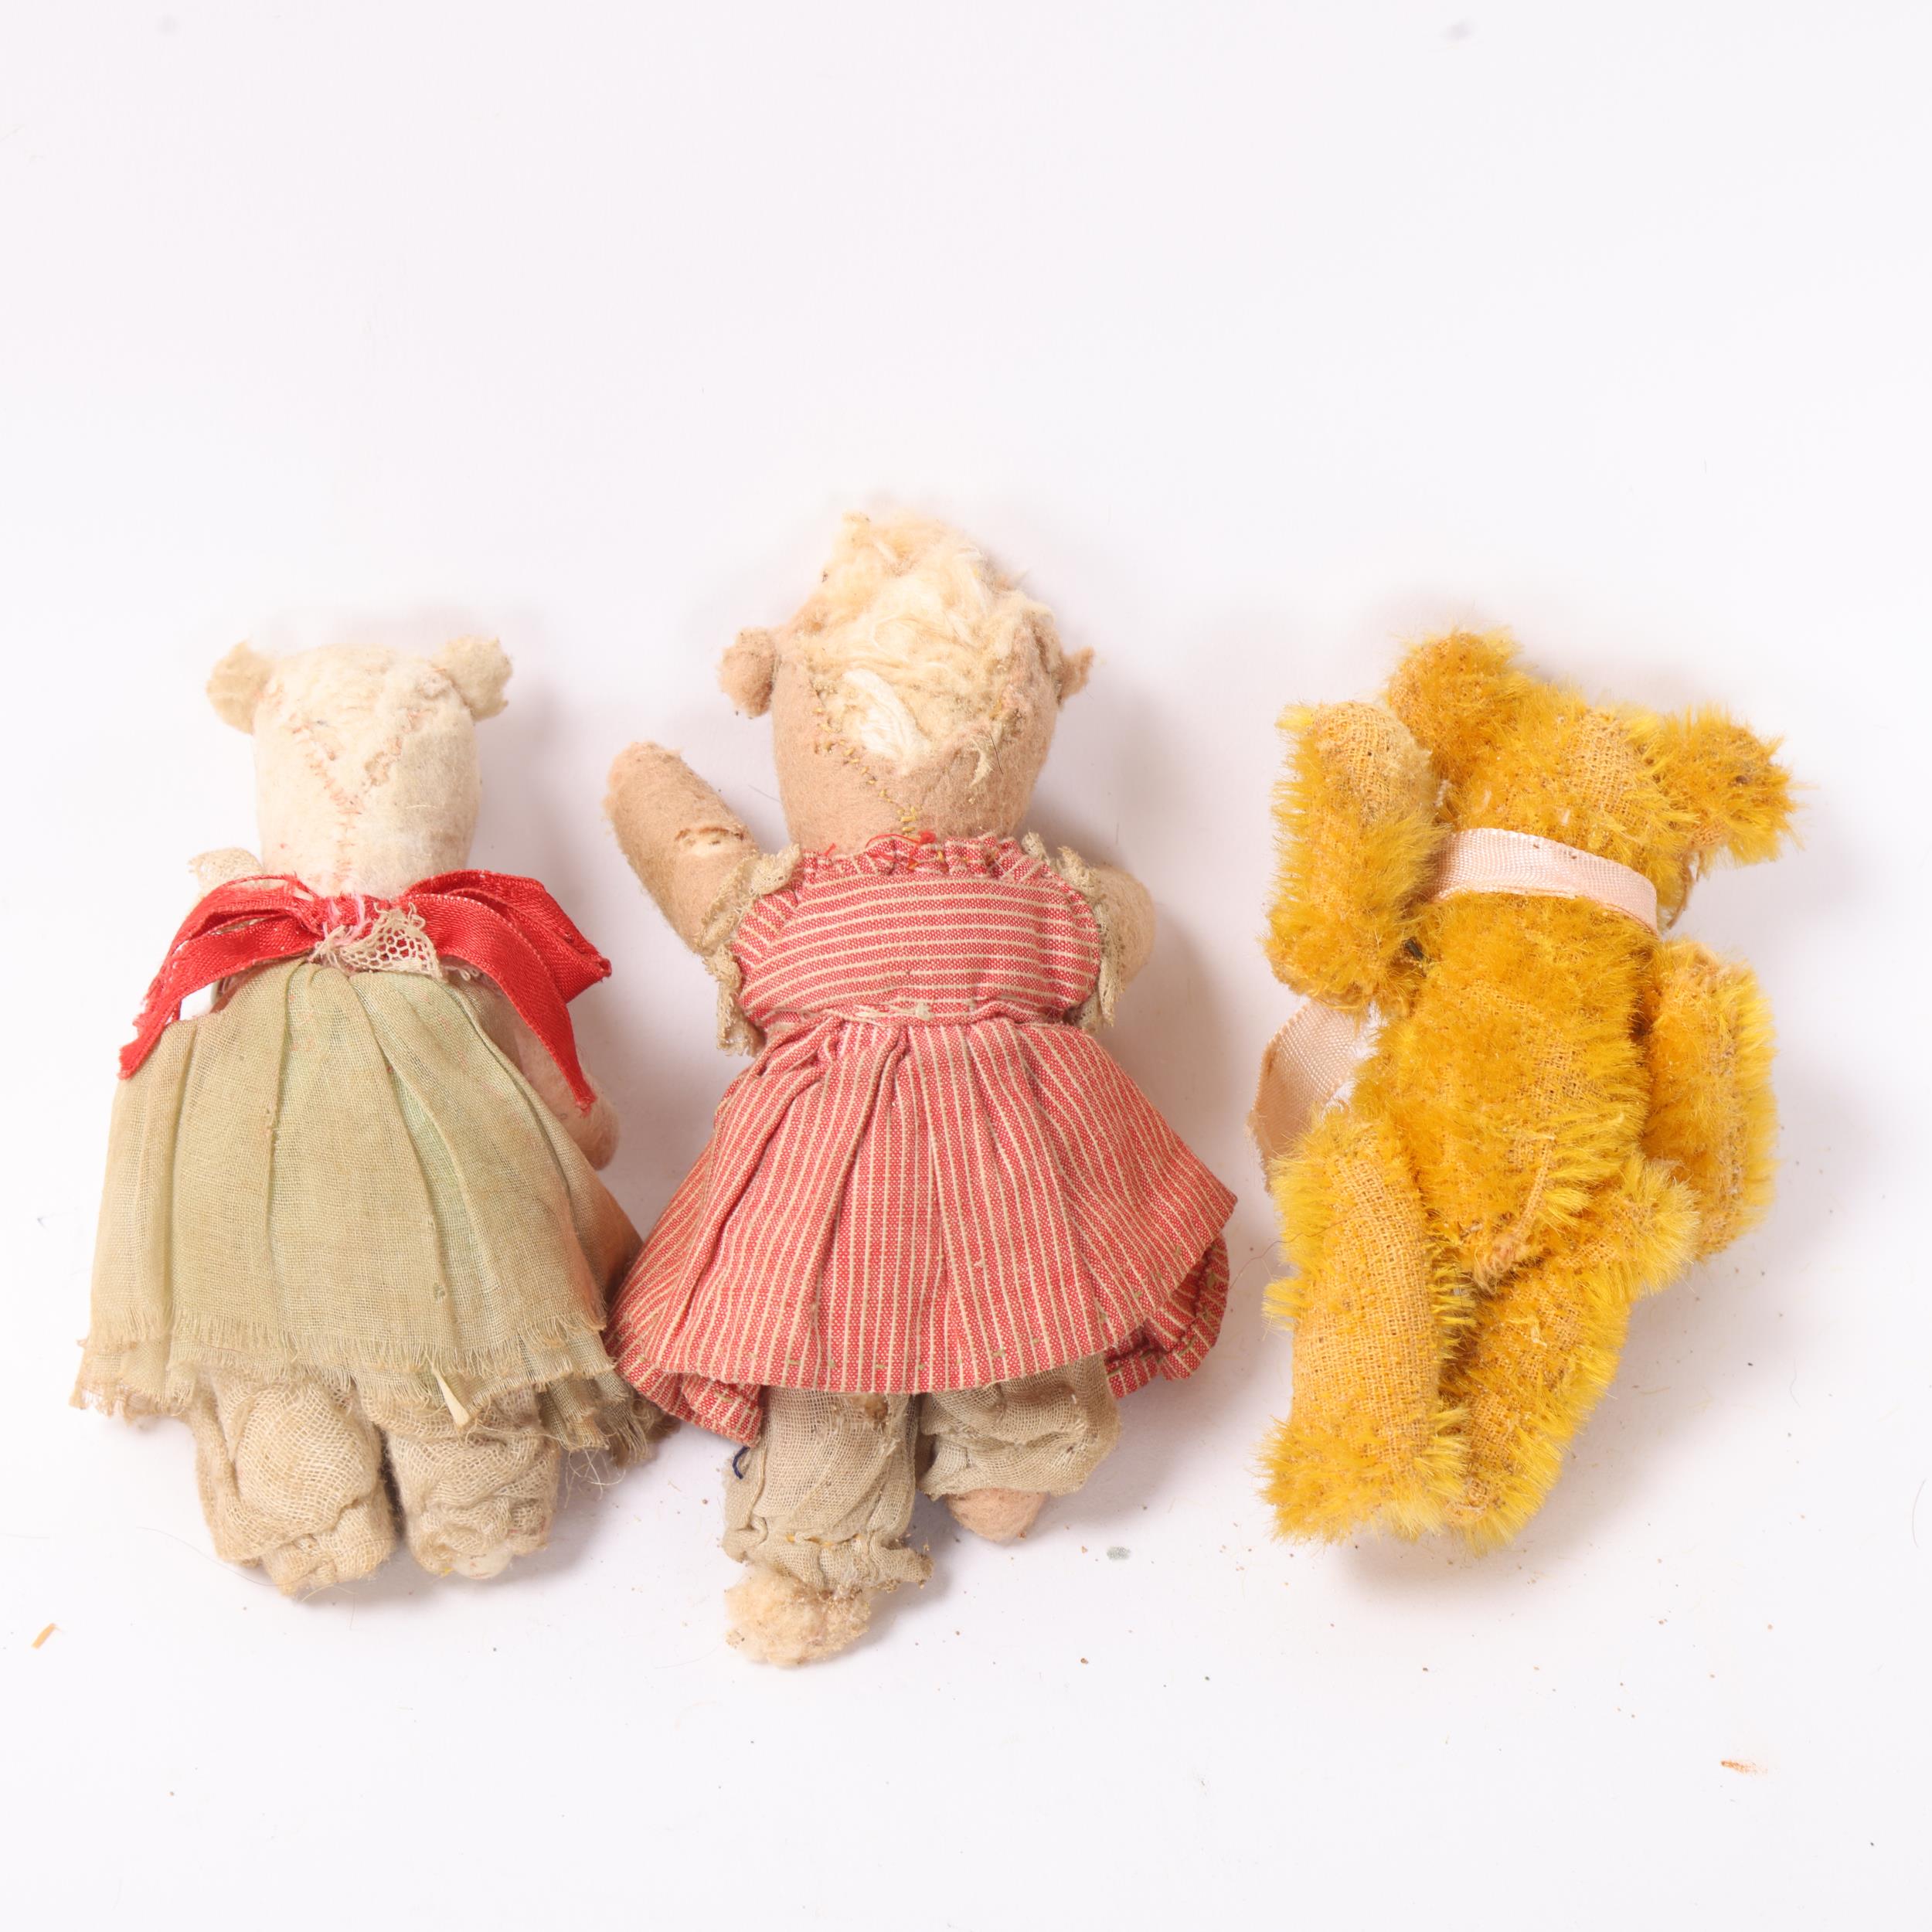 3 miniature Vintage teddy bears, 1 with glass eyes (3) - Image 2 of 3